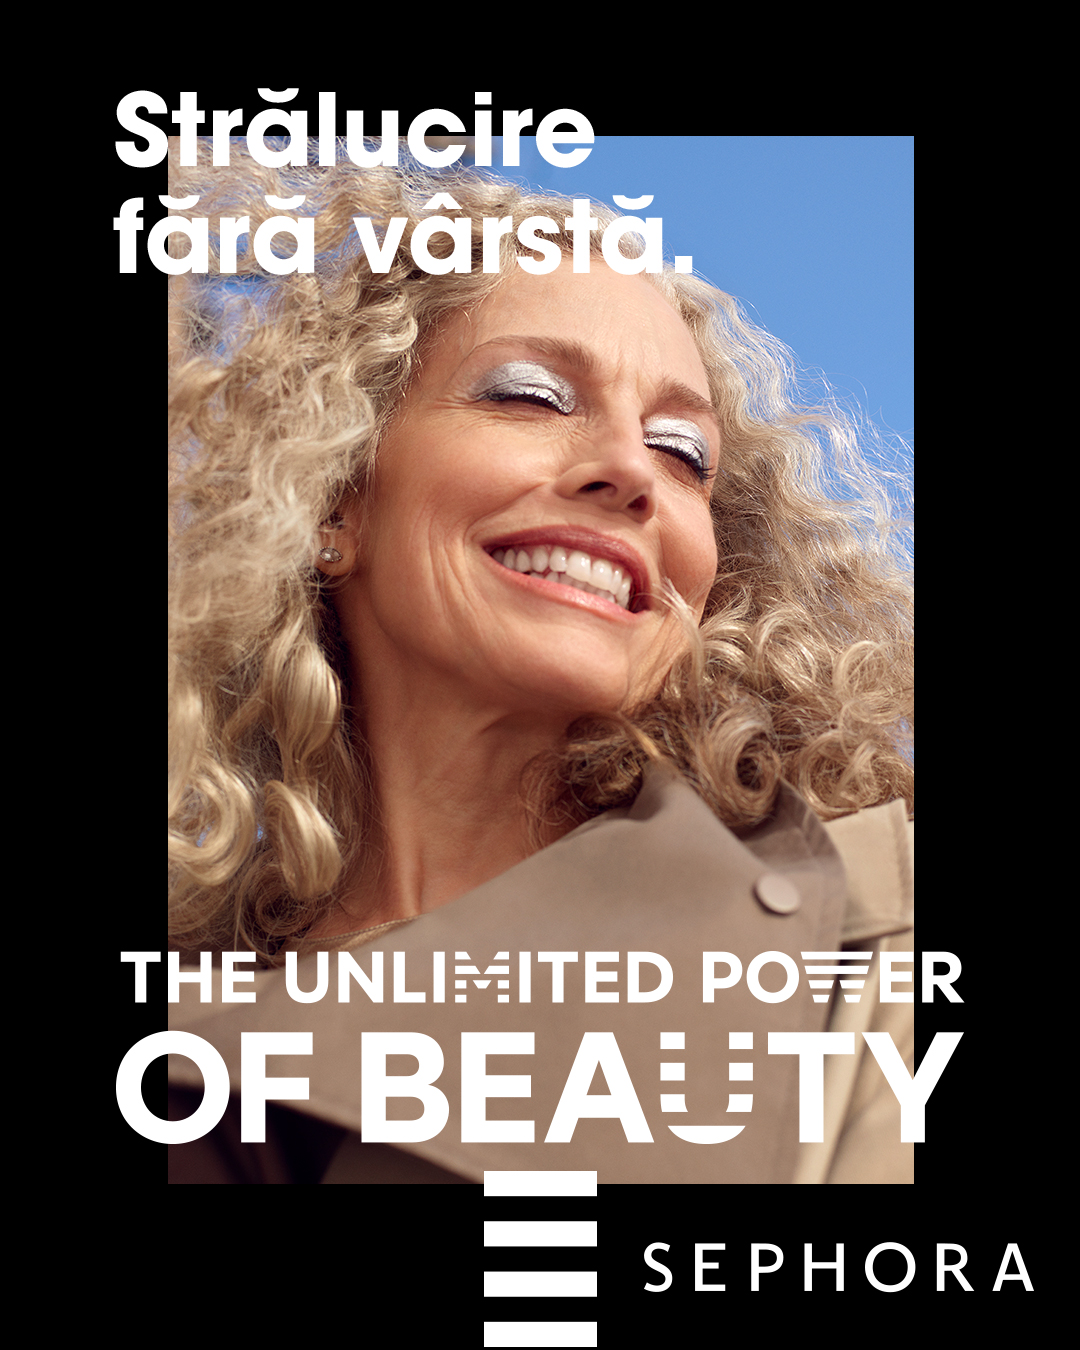 The Unlimited Power of Beauty by Sephora